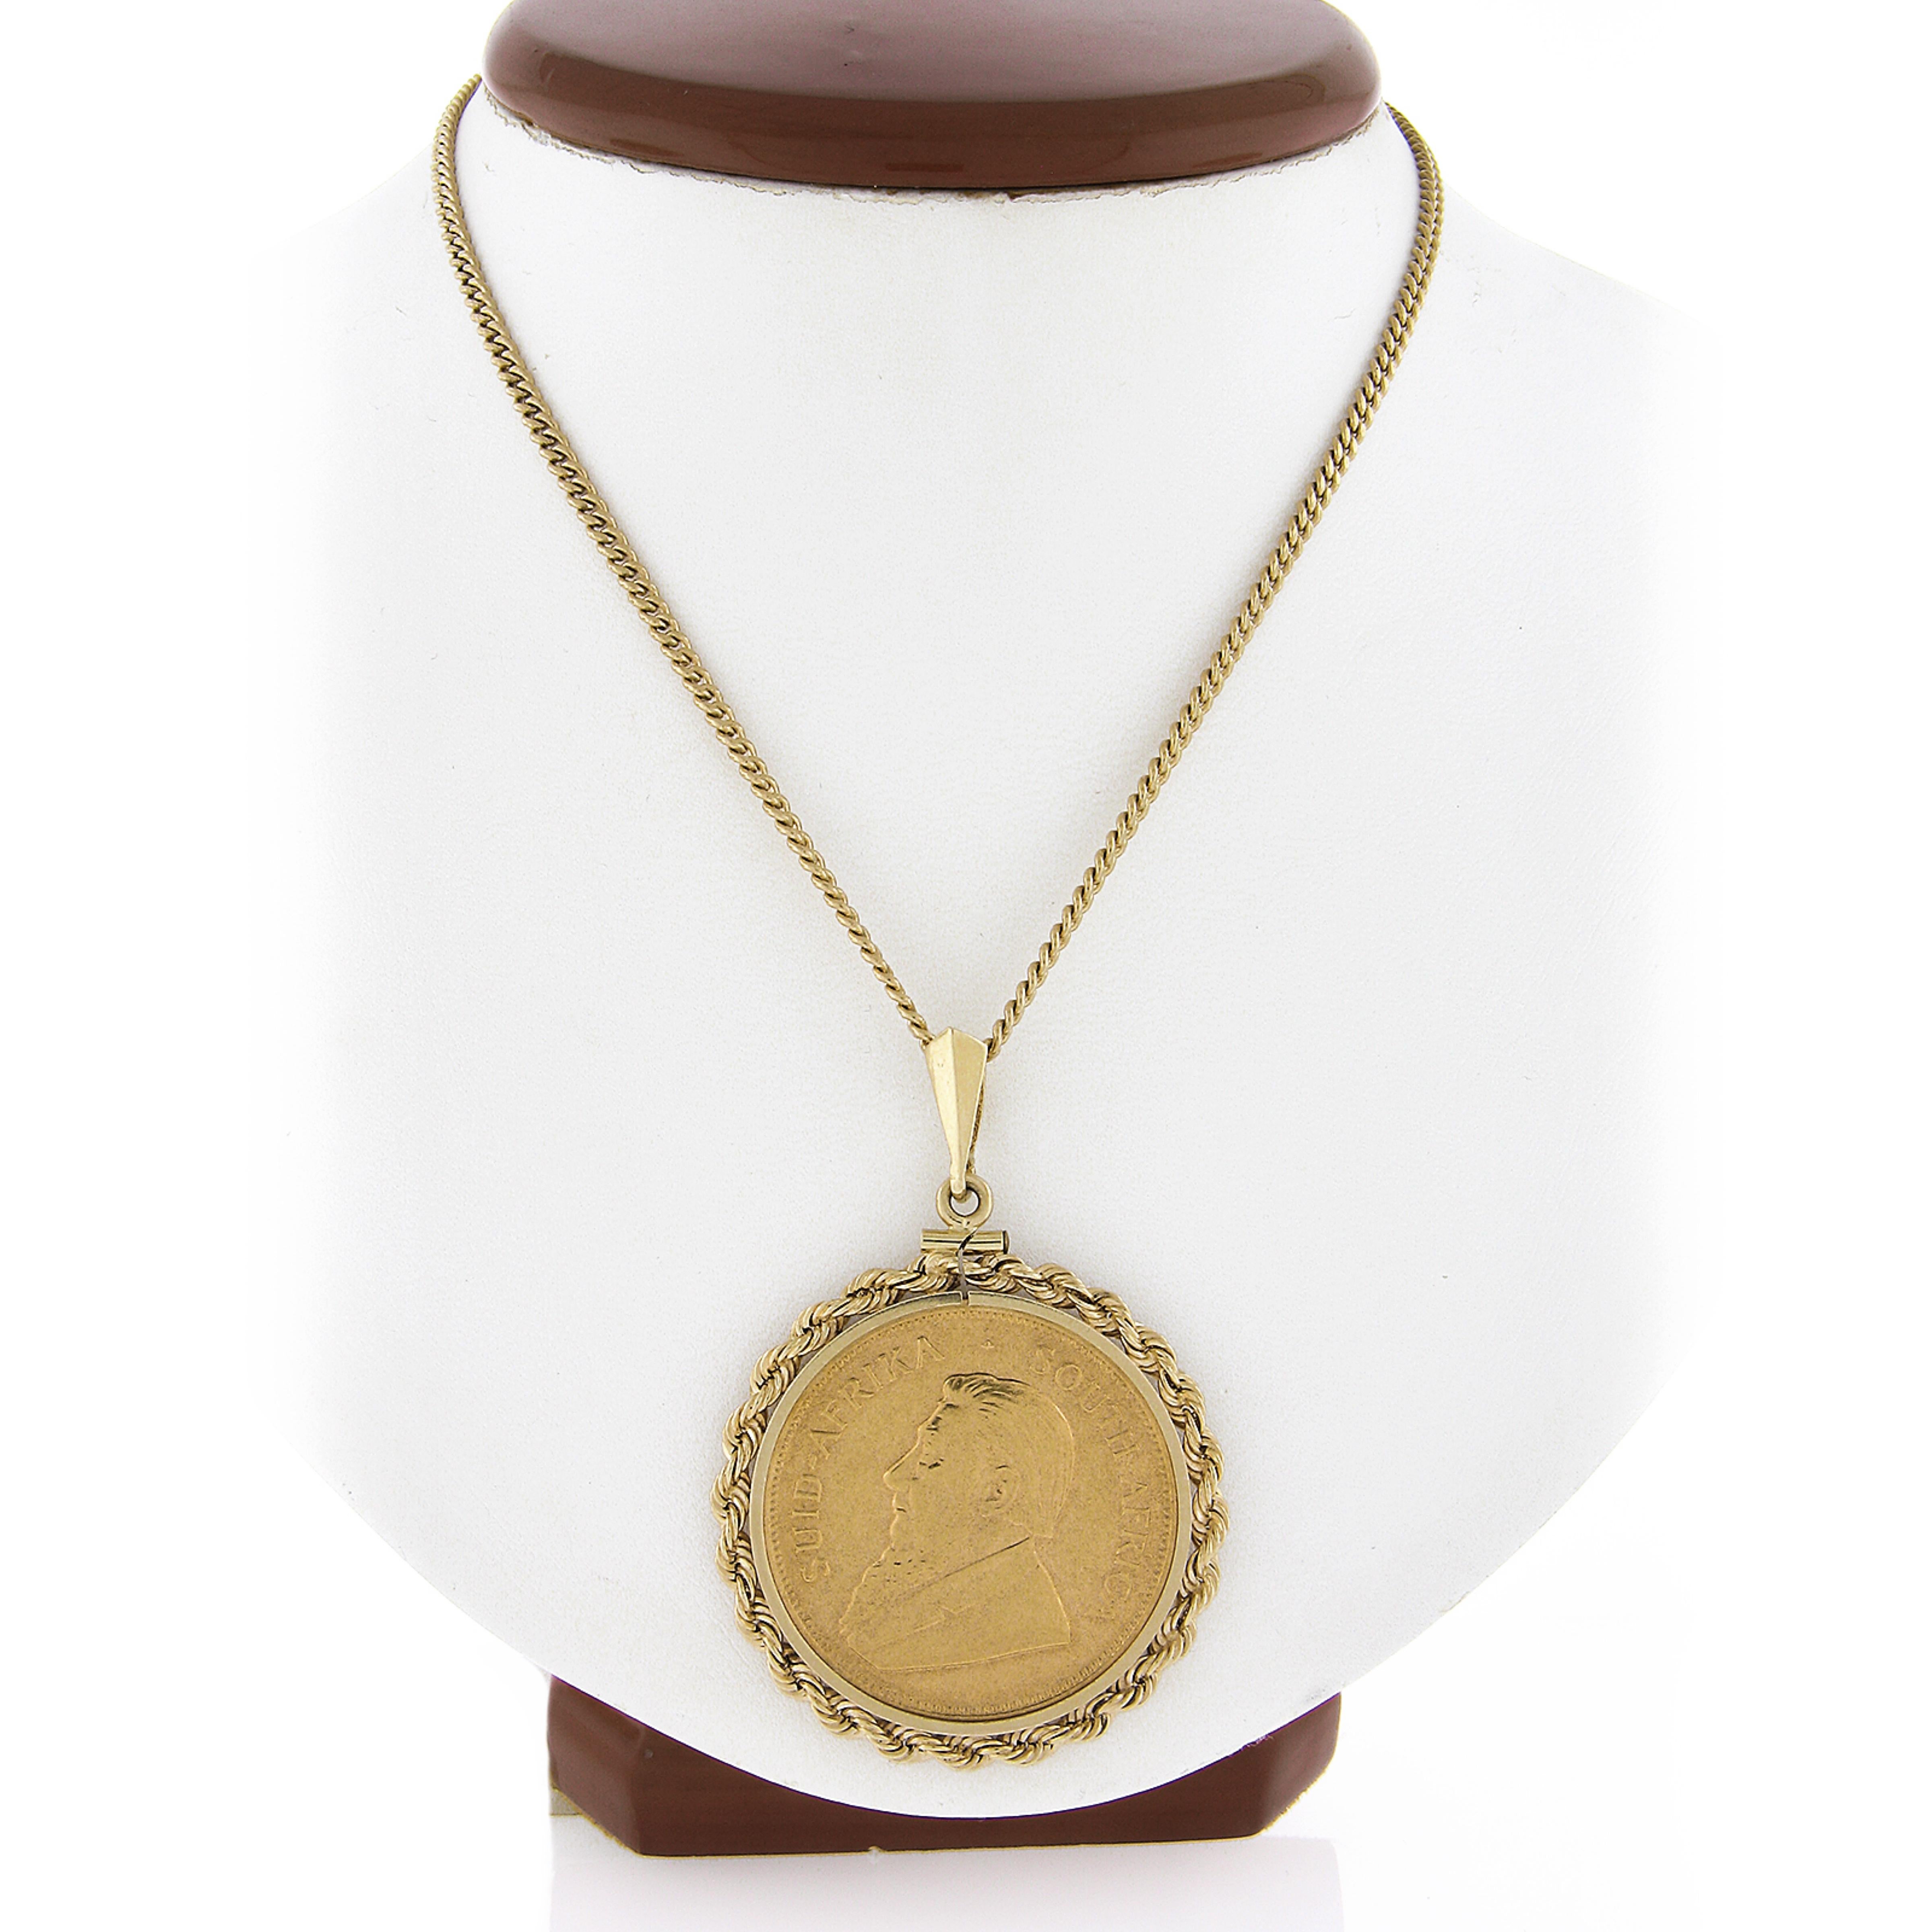 A great way to wear one of the worlds most recognized gold coins. Classic and solid chain and frame. Enjoy!

Material: Solid 22k Yellow Gold (coin) - Solid 14k Yellow Gold (chain)
Weight: 21.99 Grams (chain & frame) - 33.93 Grams (coin) - 55.92